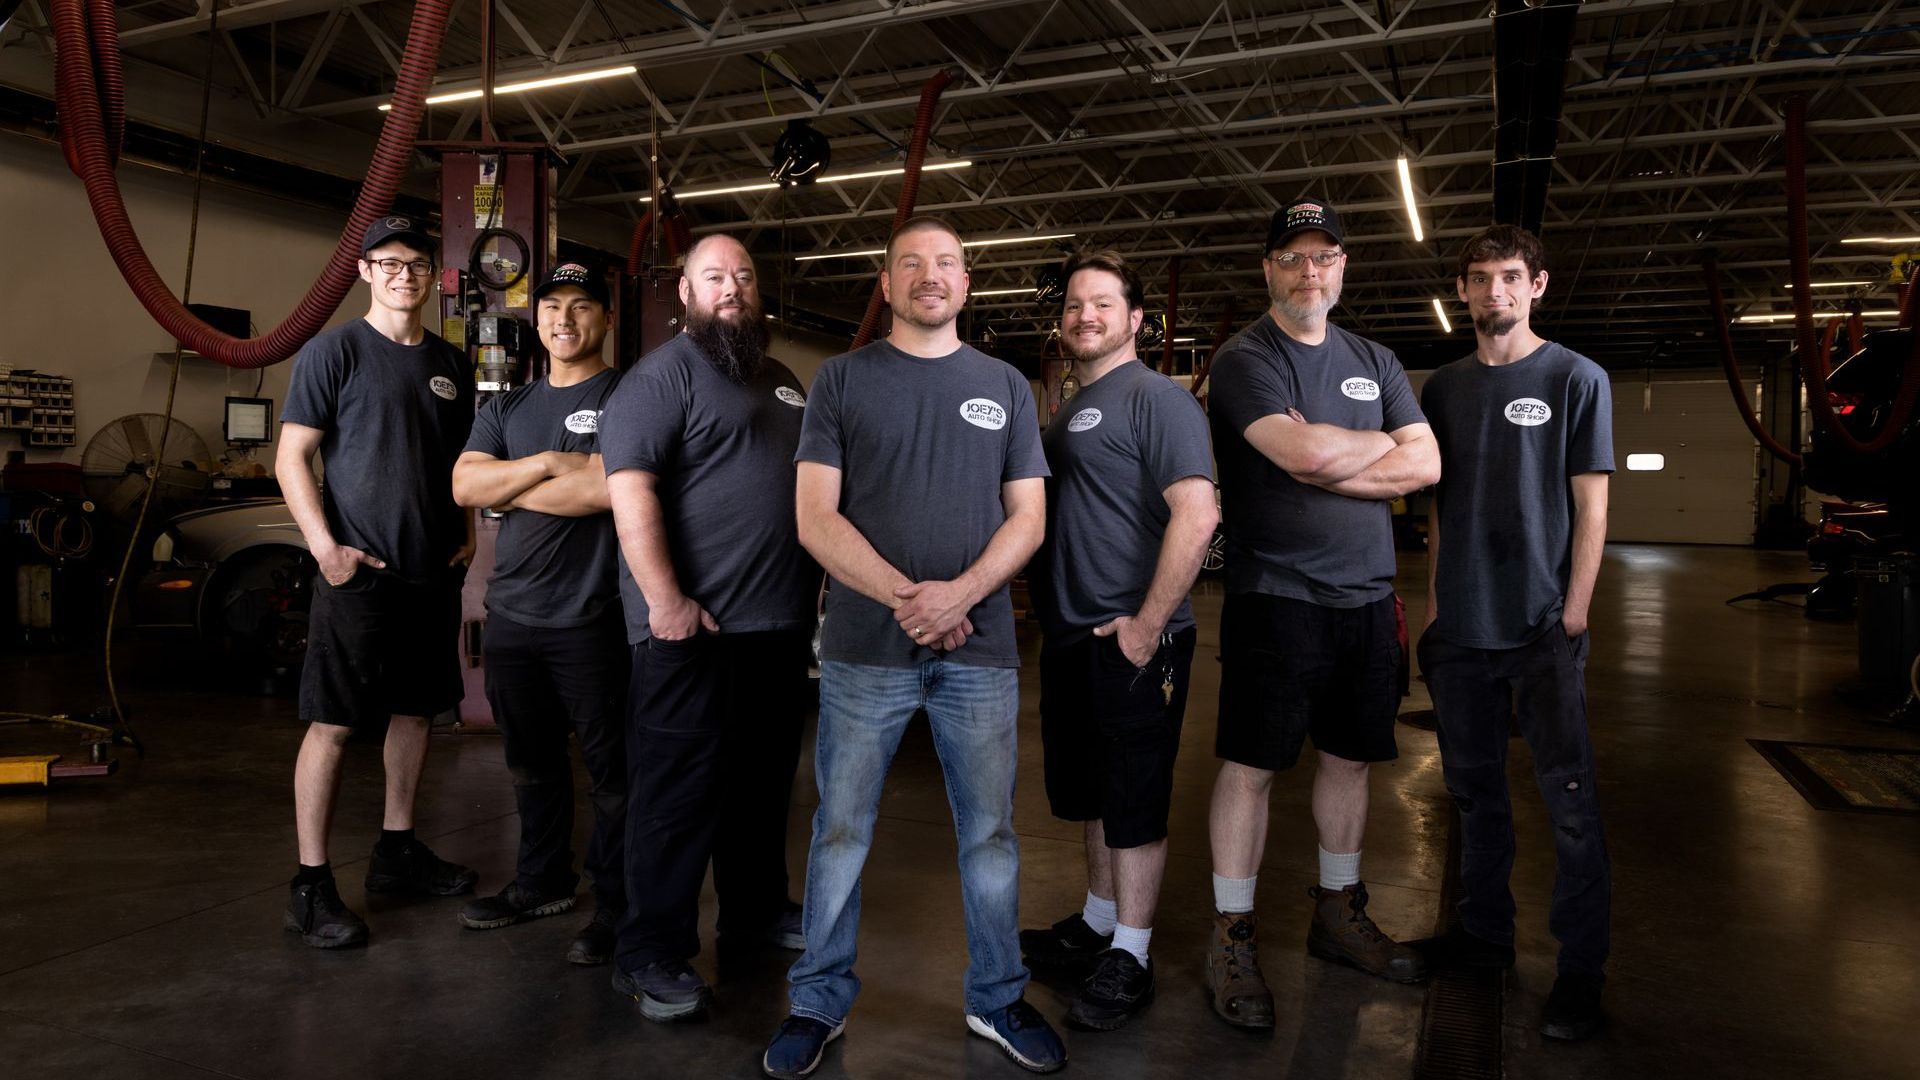 The crew at Joey's Auto Shop in Des Moines, IA